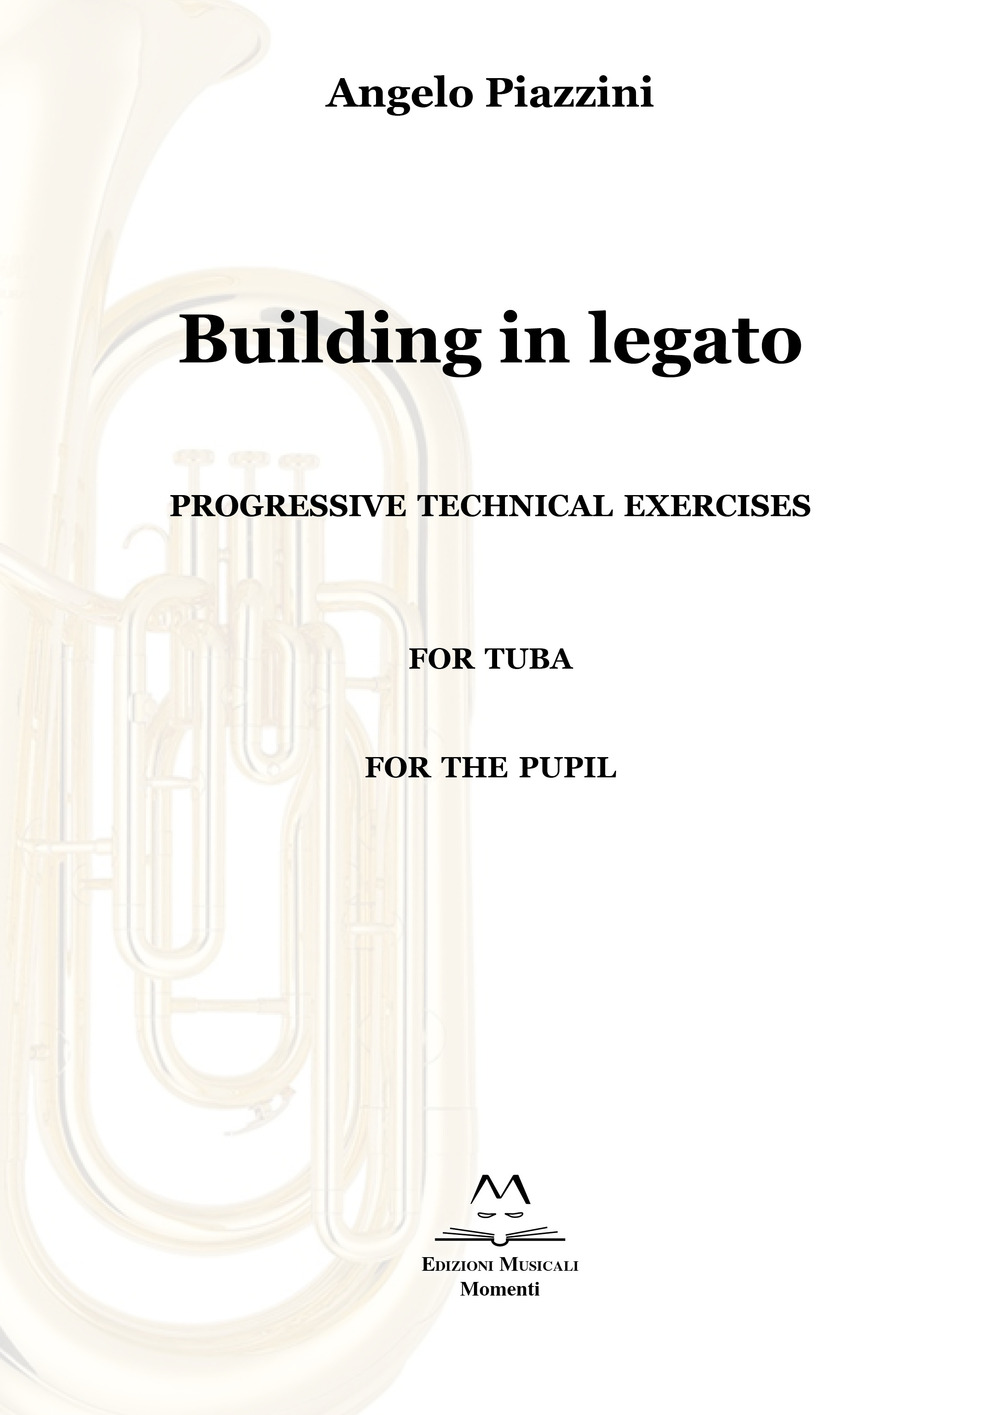 Building in legato. Progressive techinacal exercises. For tuba. For the pupil